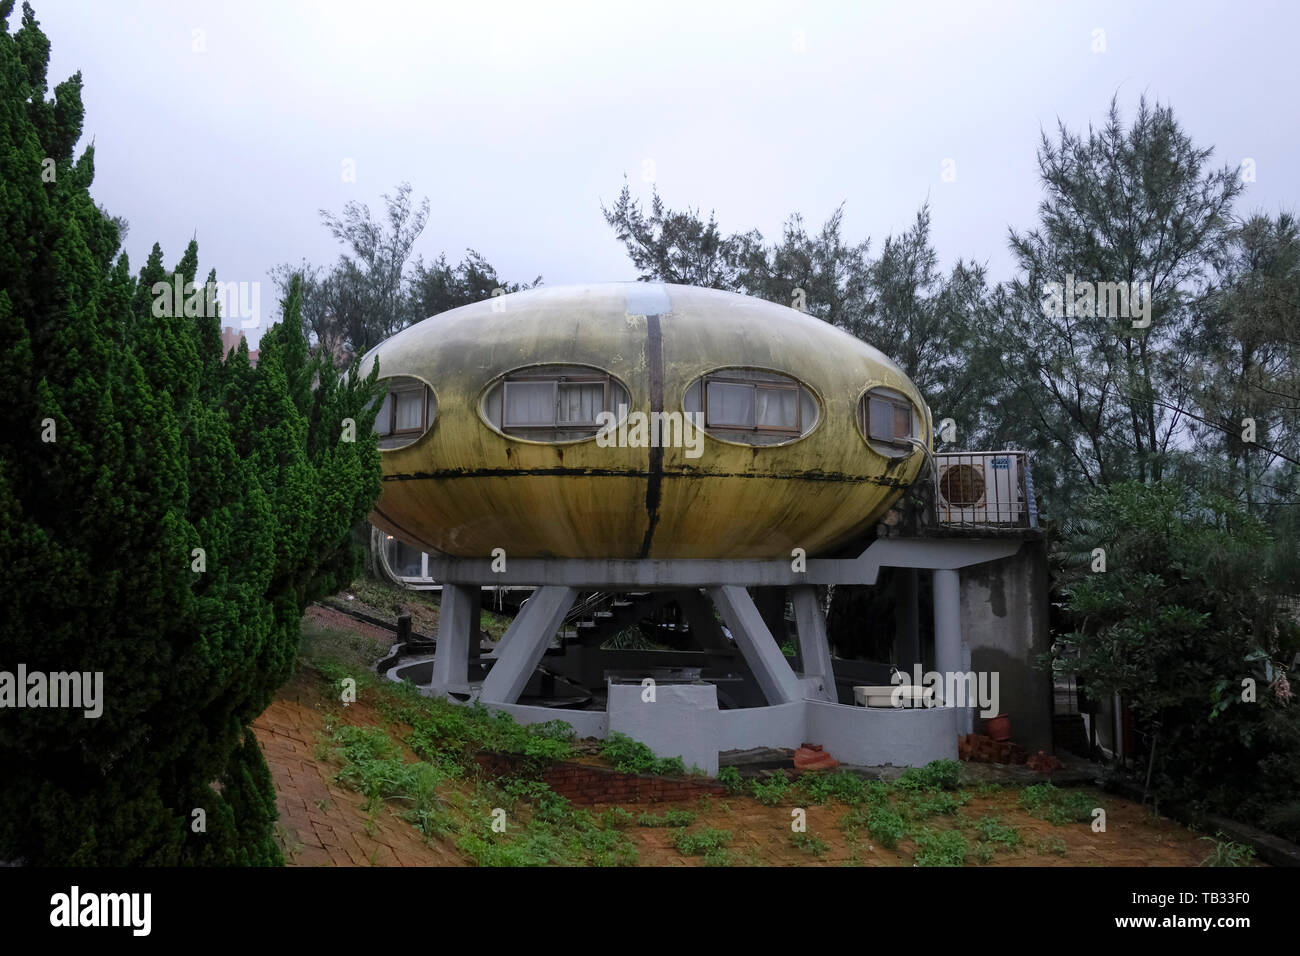 Abandoned Sanzhi UFO house in the neighborhood of Wanli region home to the last pod of Futuro “UFO” houses in Sanzhi District, New Taipei, Taiwan. The Sanzhi pod houses or Sanzhi Pod City, were a set of abandoned and never completed pod-shaped buildings a concept from the 1960s envisioned by the Finnish architect Matti Suuronen to solve the problem of mass-producing cheap homes. Stock Photo